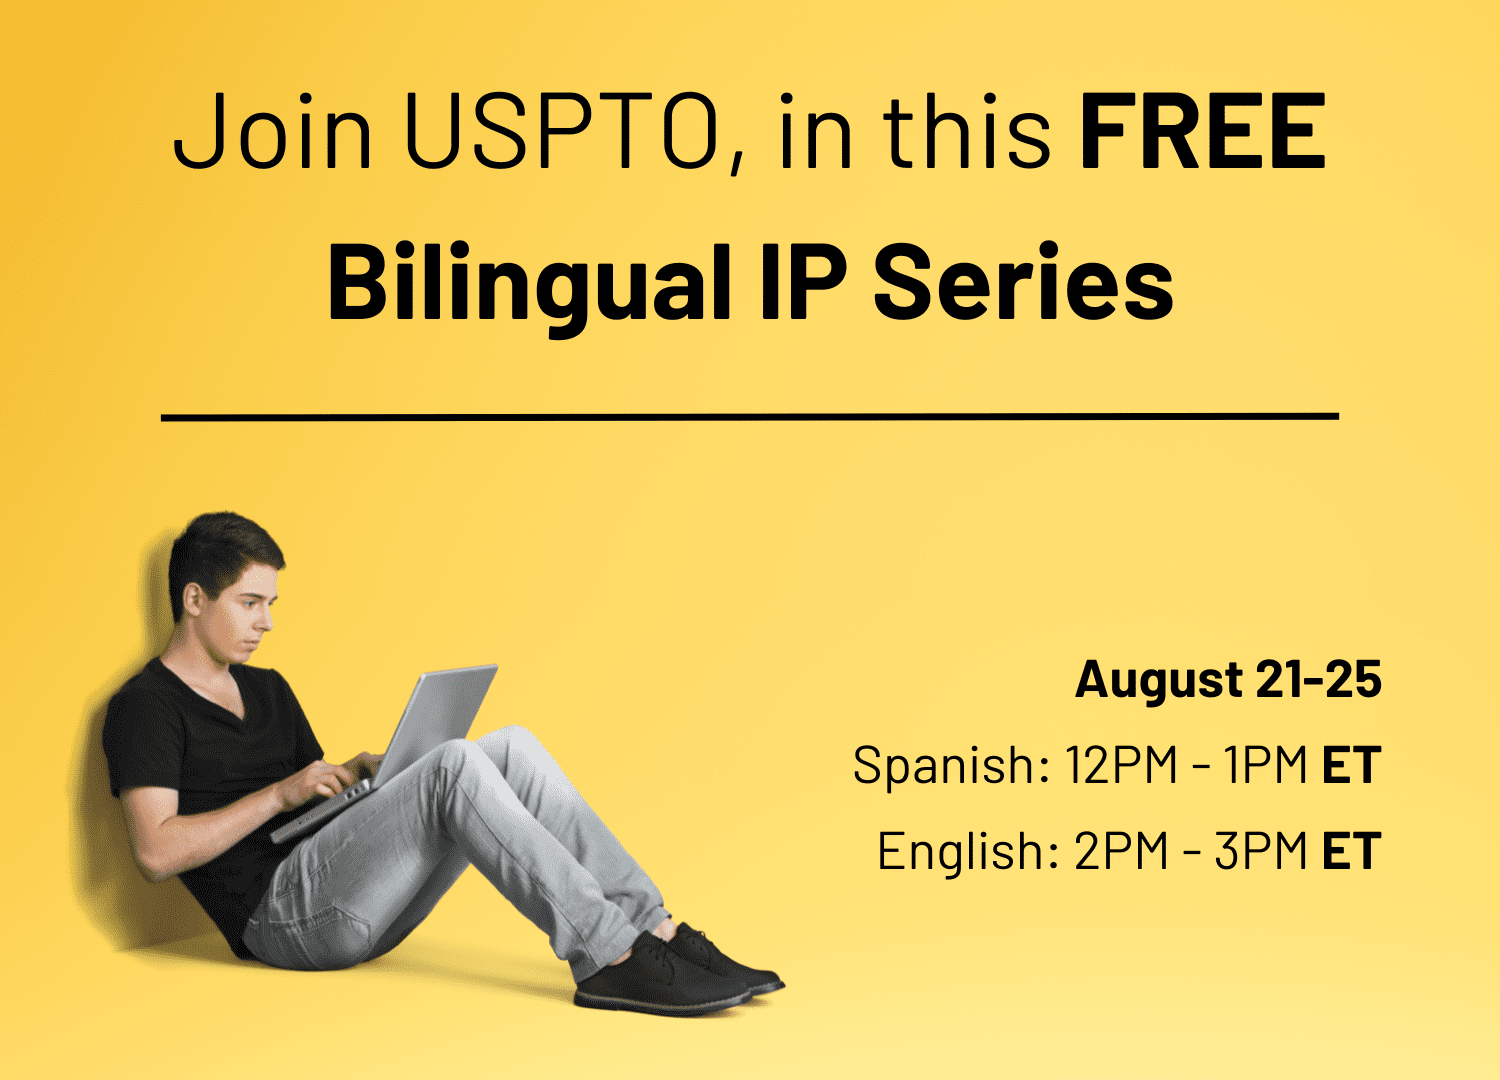 Join USPTO, in this FREE Bilingual IP Series August 21-25 Spanish: 12PM - 1PM ET English: 2PM - 3PM ET